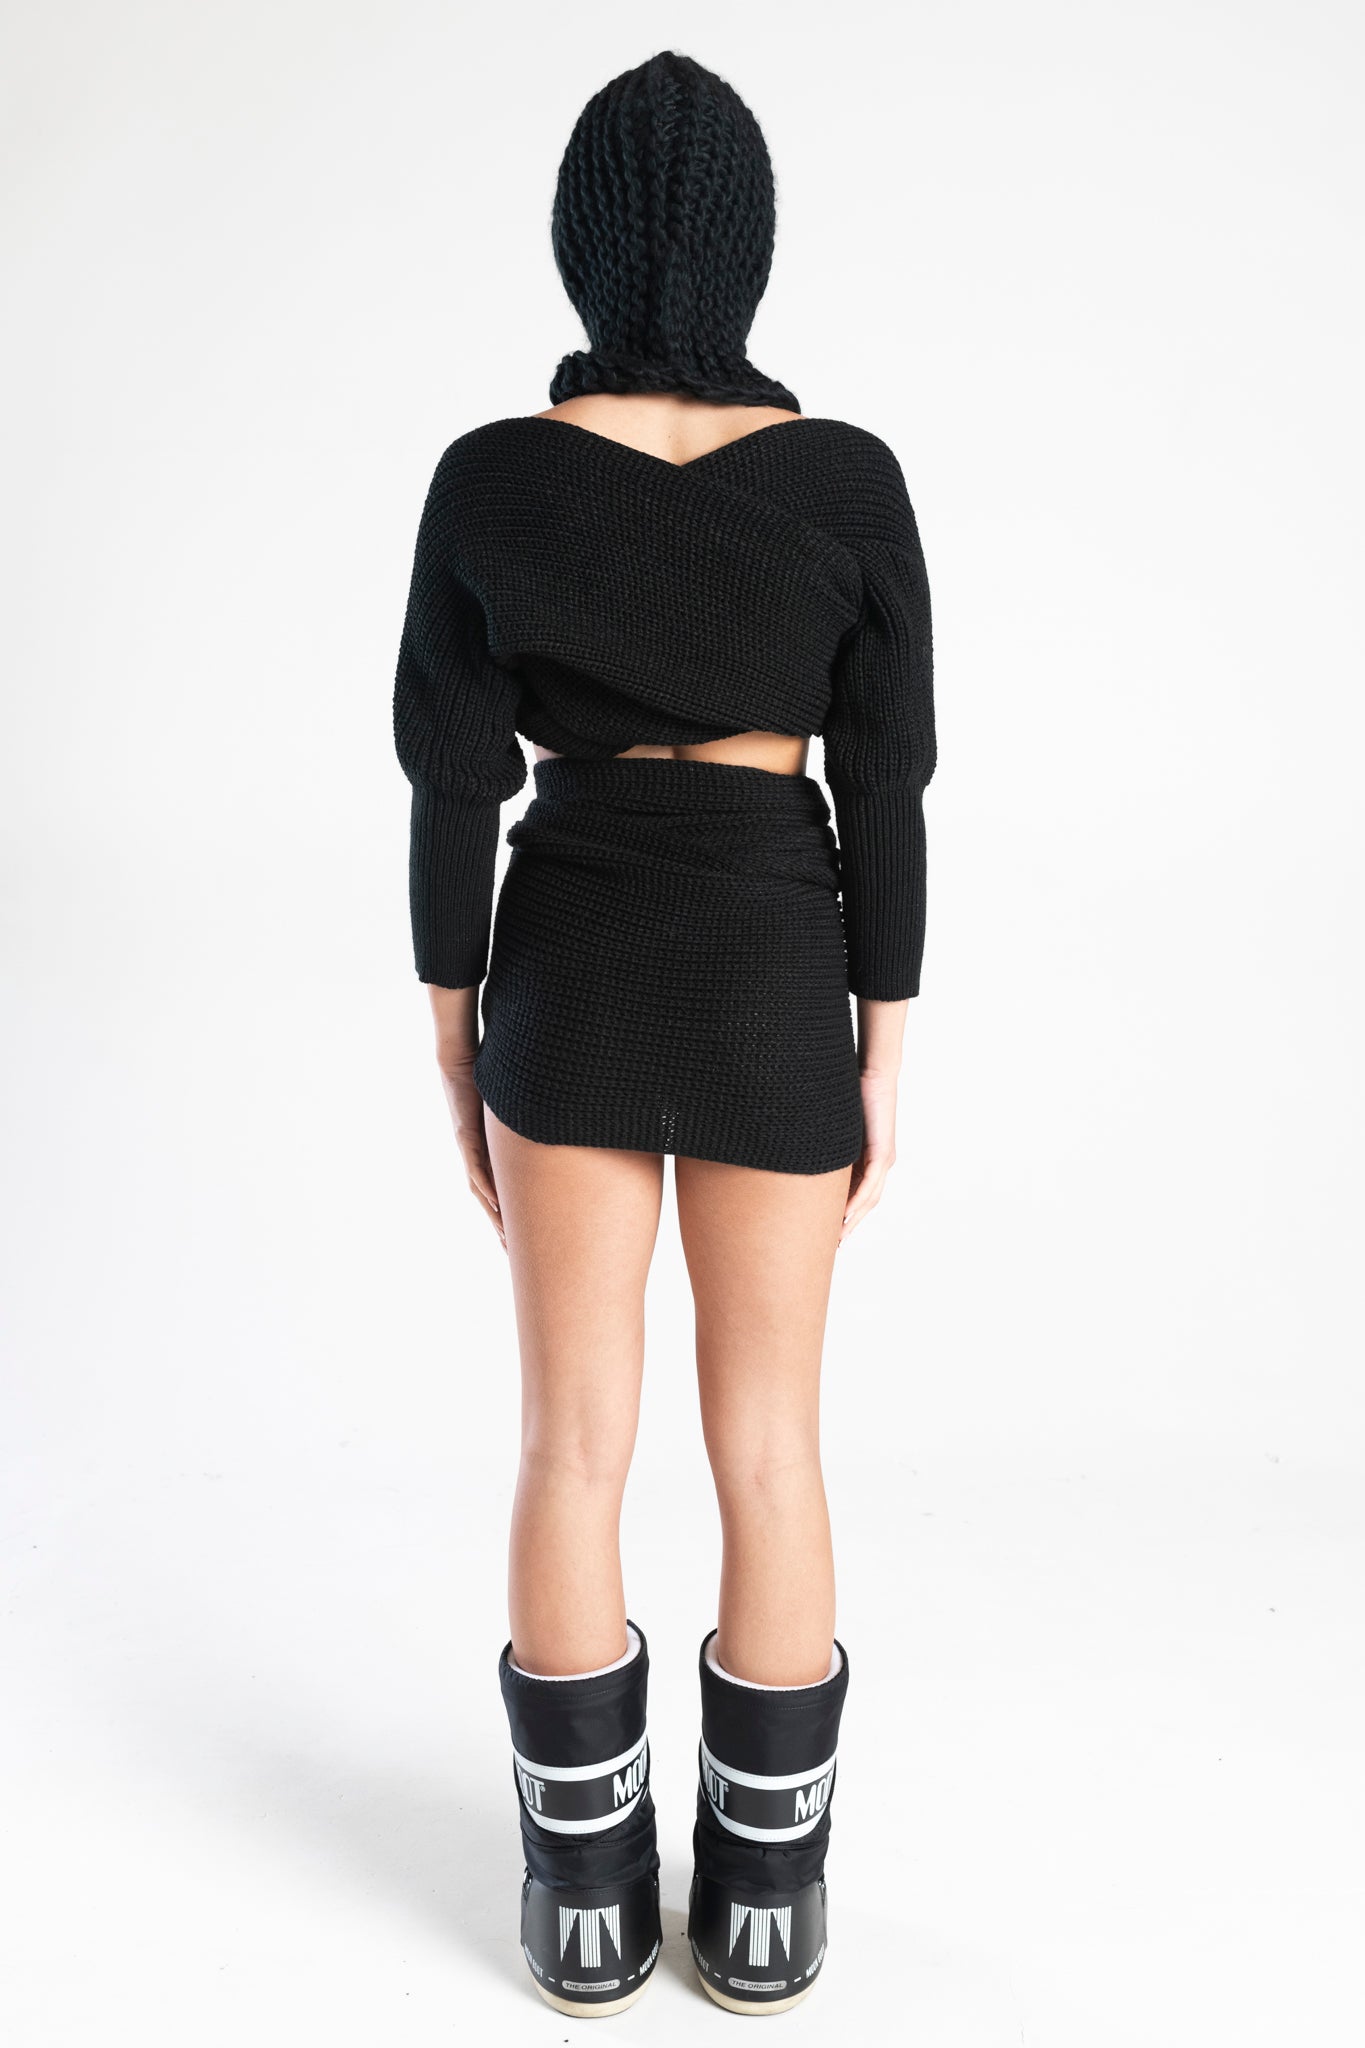 ICEBOUND KNITTED TOP & SKIRT